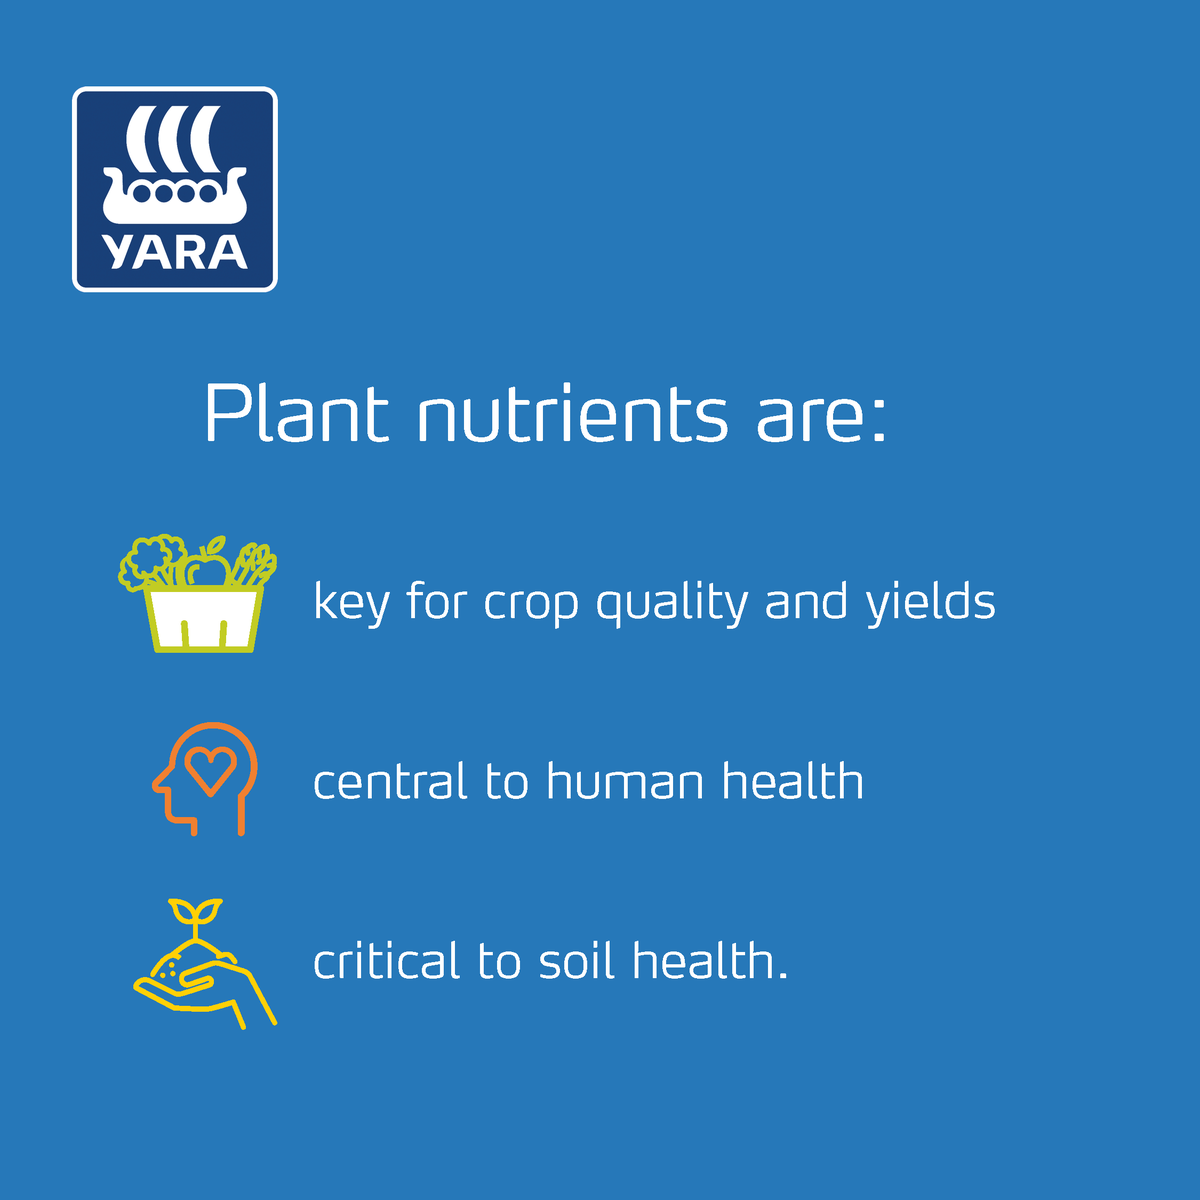 Around half the food consumed today can be attributed to the use of #fertilizers. 🌍

Yara works with #farmers and the whole agri-food value chain to optimize #nutrientmanagement. 👩‍🌾 Nutrients are essential; that's why we need to make sure #EveryNutrientCounts!